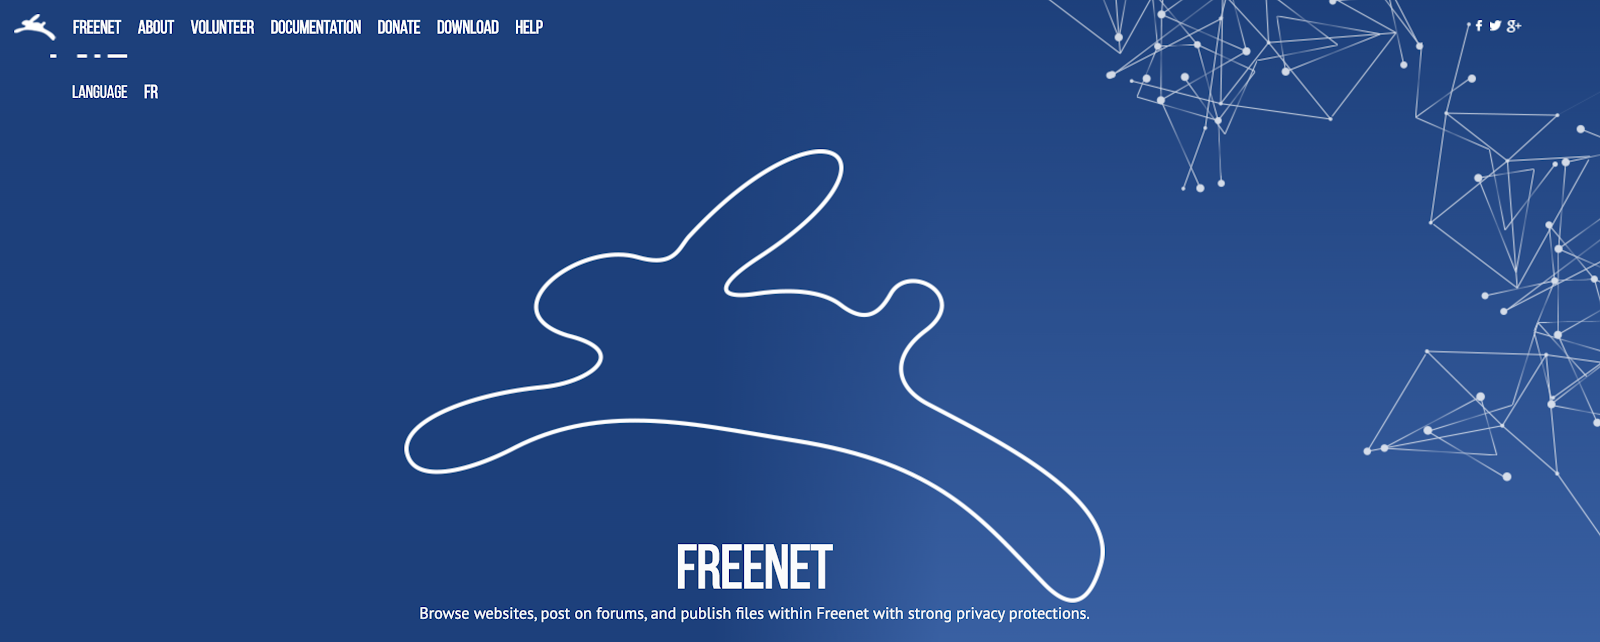 freenet page